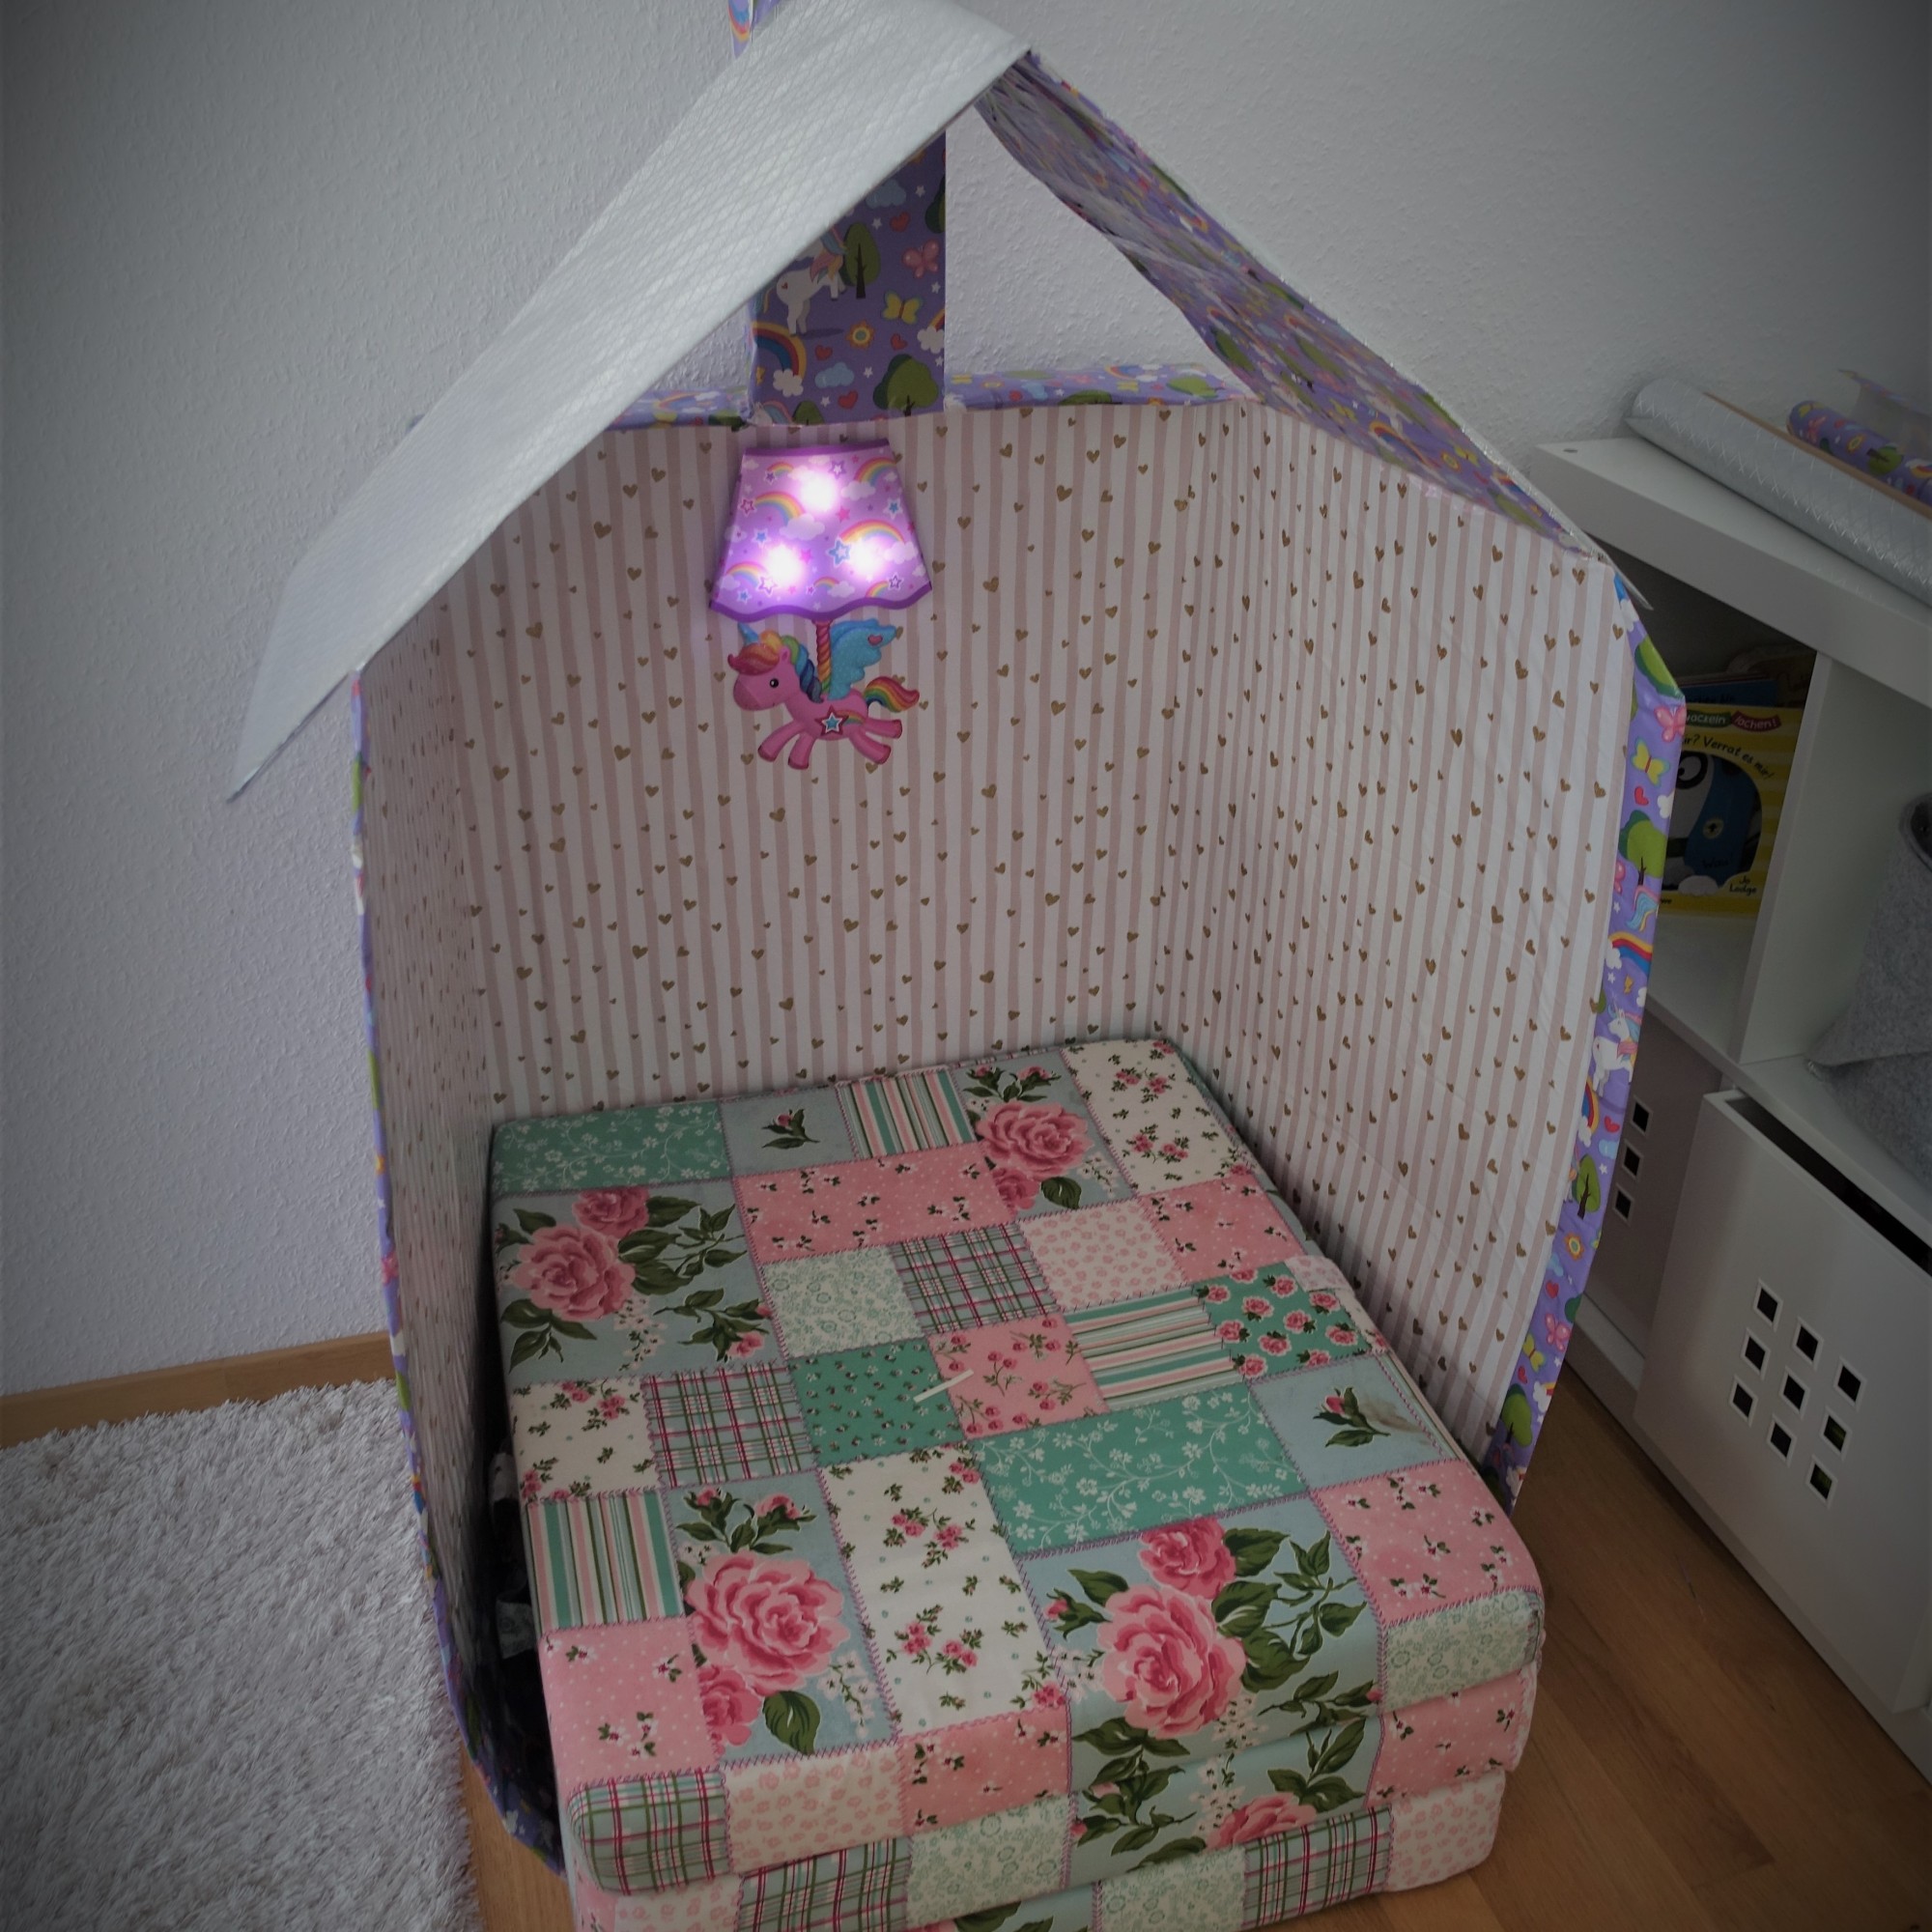 The final cardboard playhouse with a little lamp in the middle